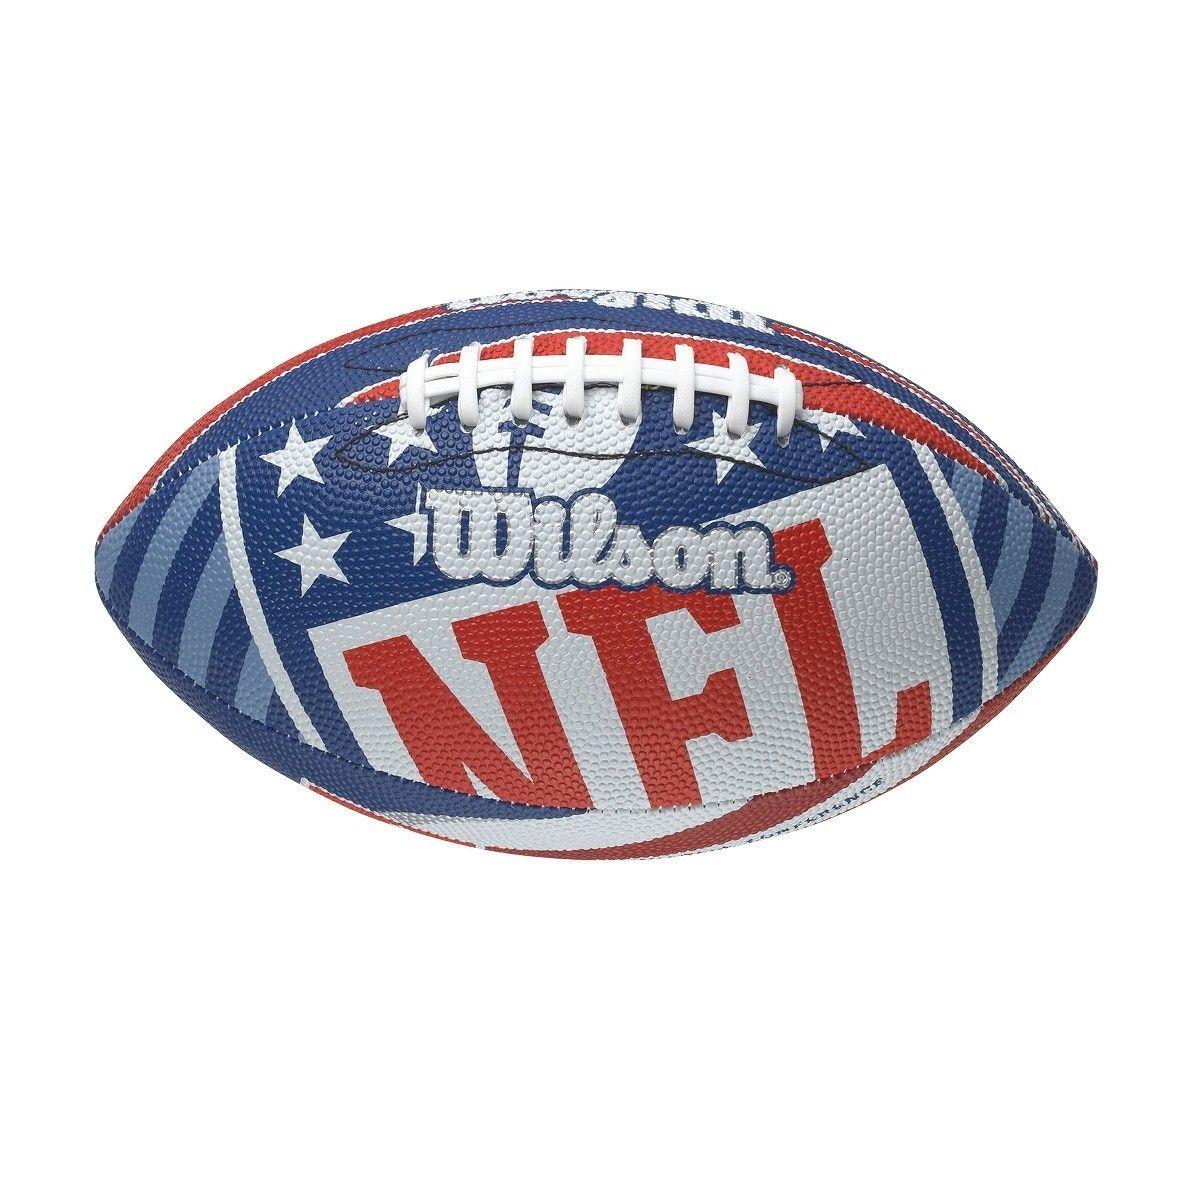 Red White and Blue Sports Team Logo - Wilson NFL Team Logo American Football. Blue / White / Red. A&A Sports